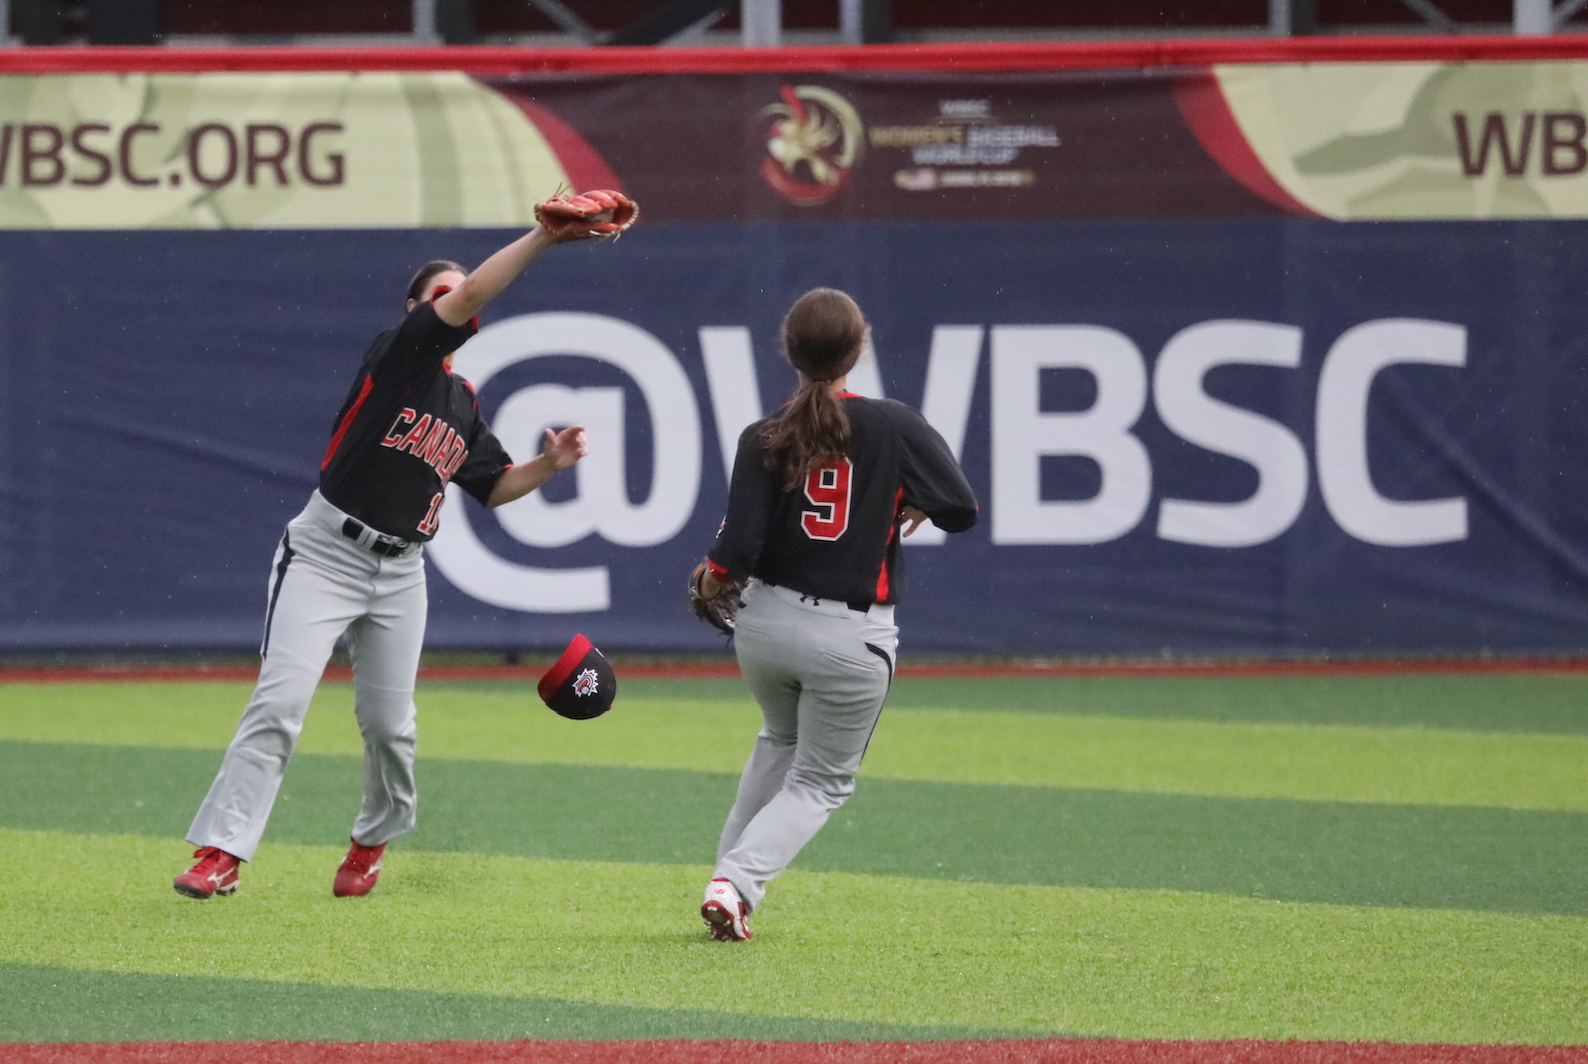 Women’s Baseball World Cup: Canada edged by Japan